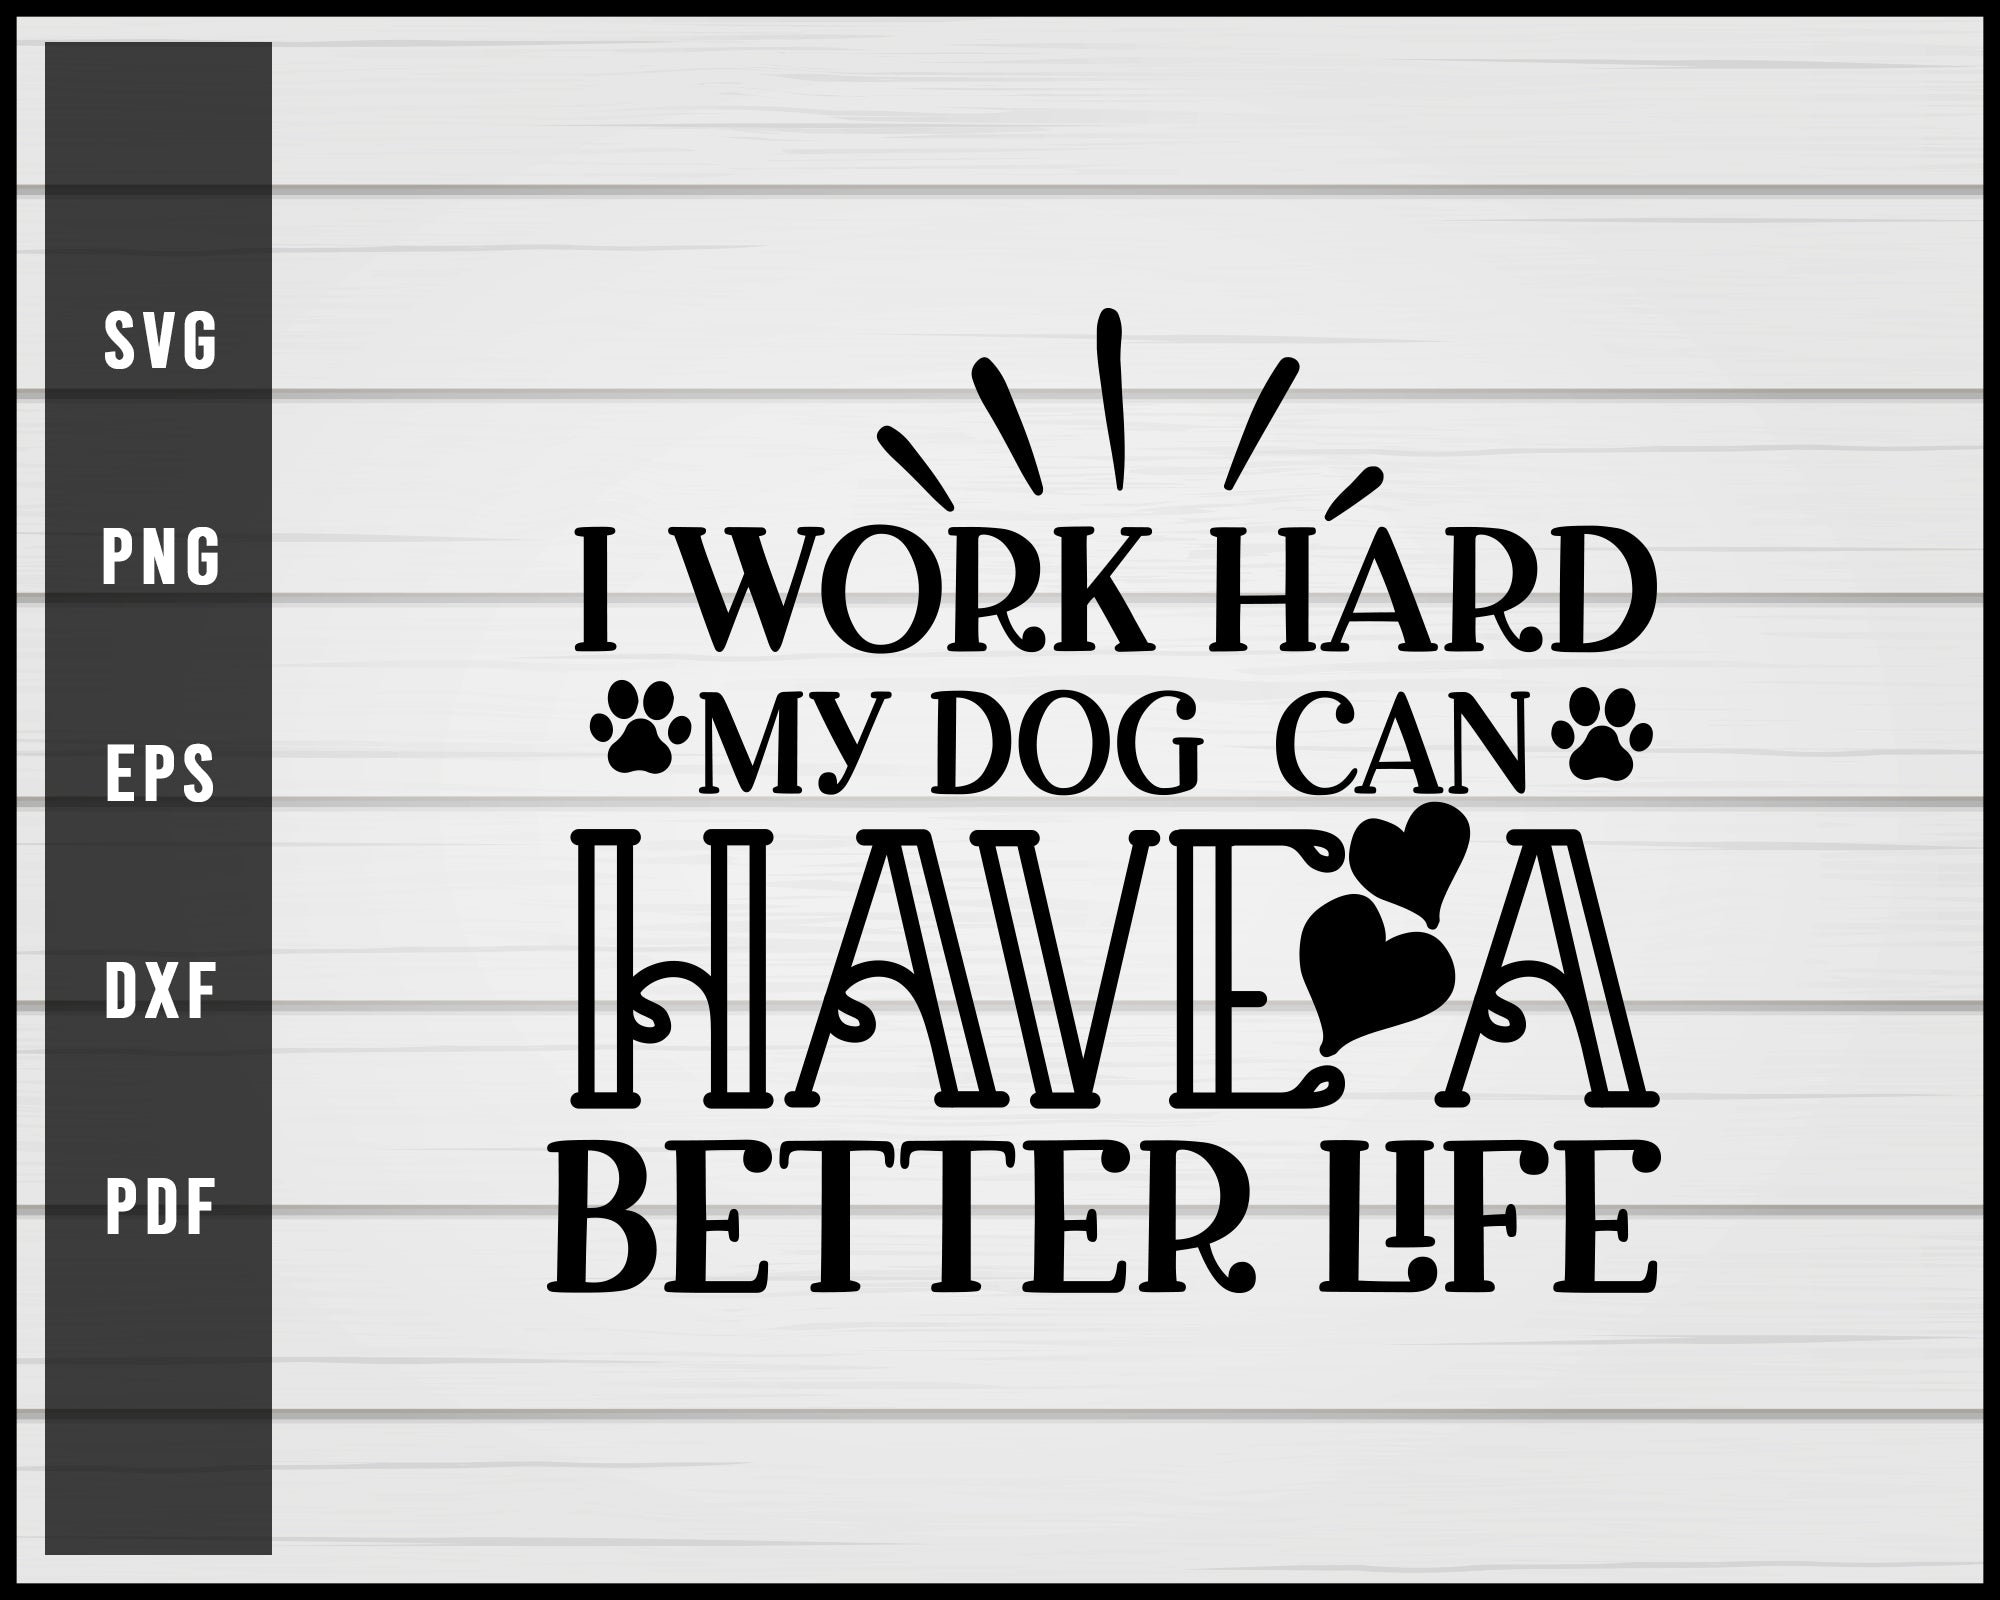 I Work Hard My Dog can have a Better Life svg png Silhouette Designs For Cricut And Printable Files